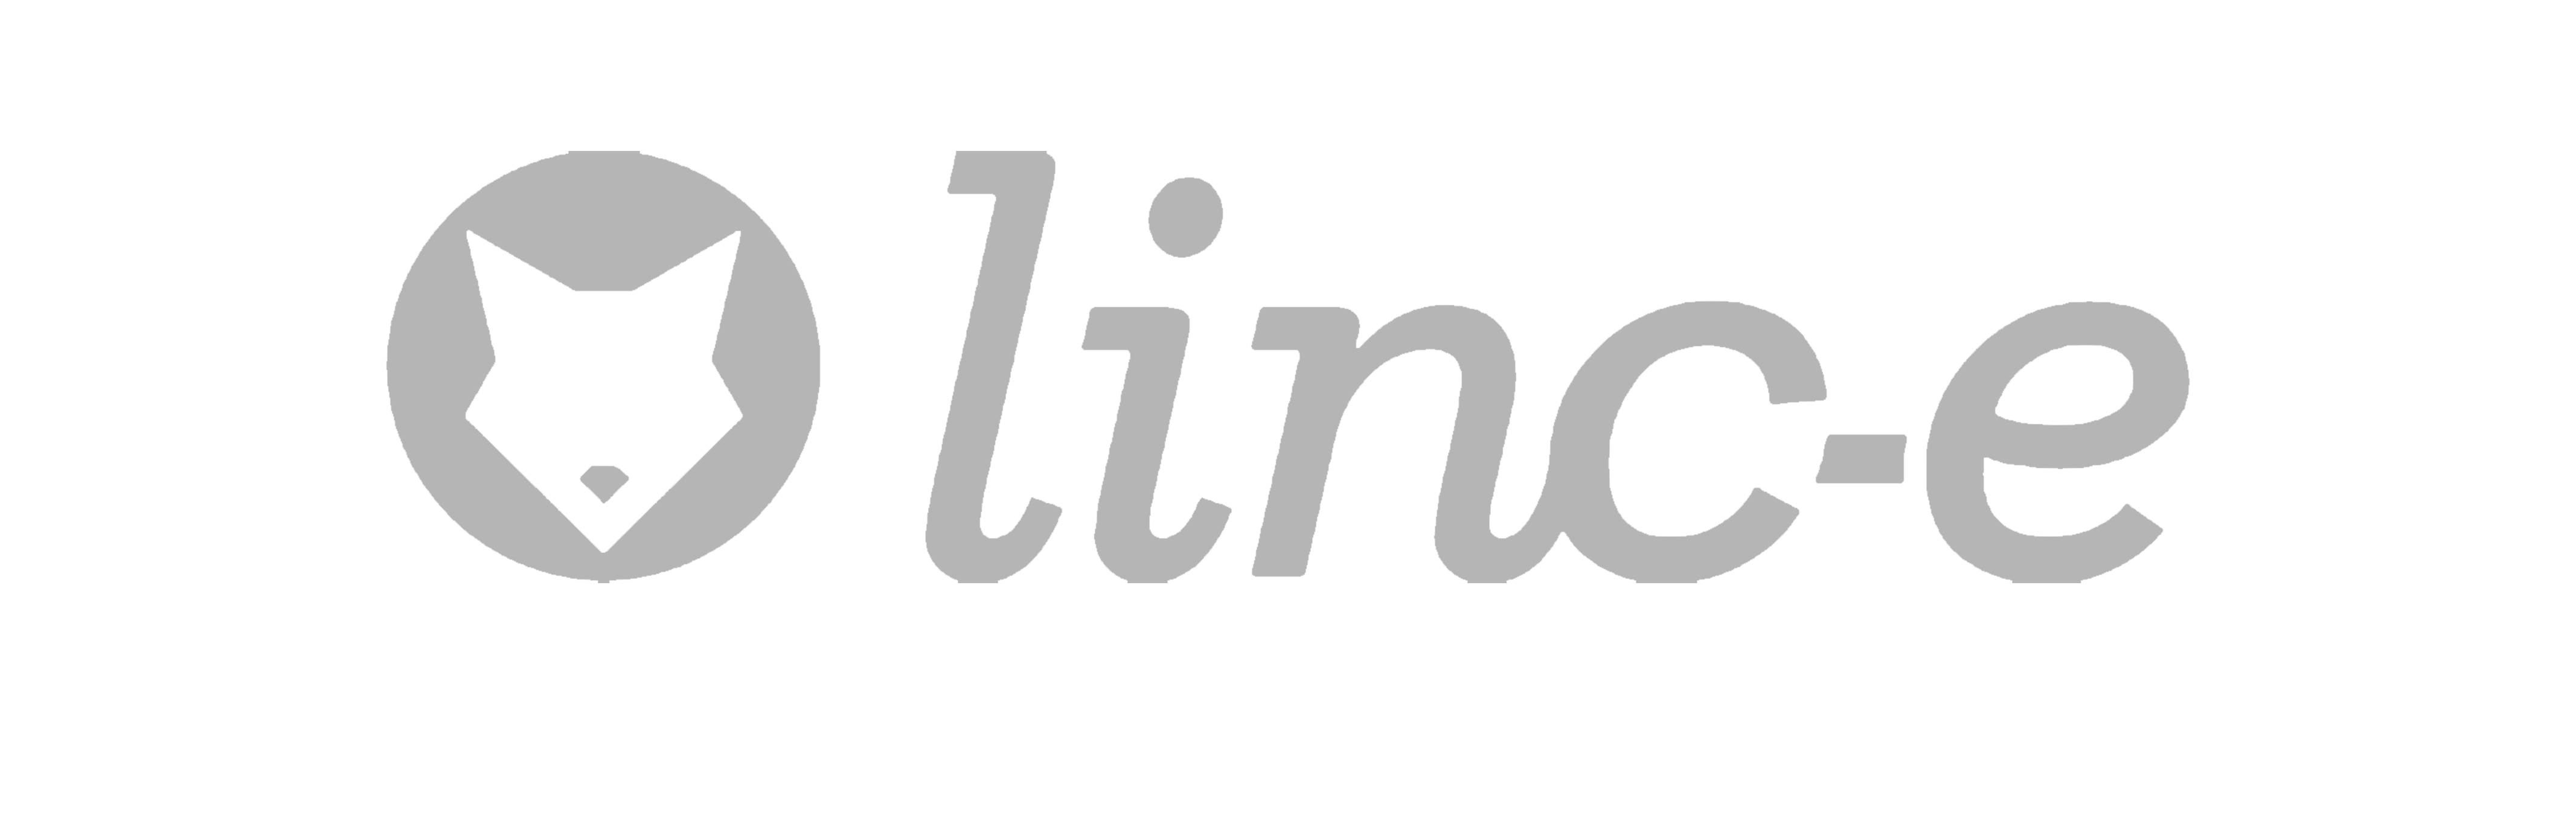 lince png